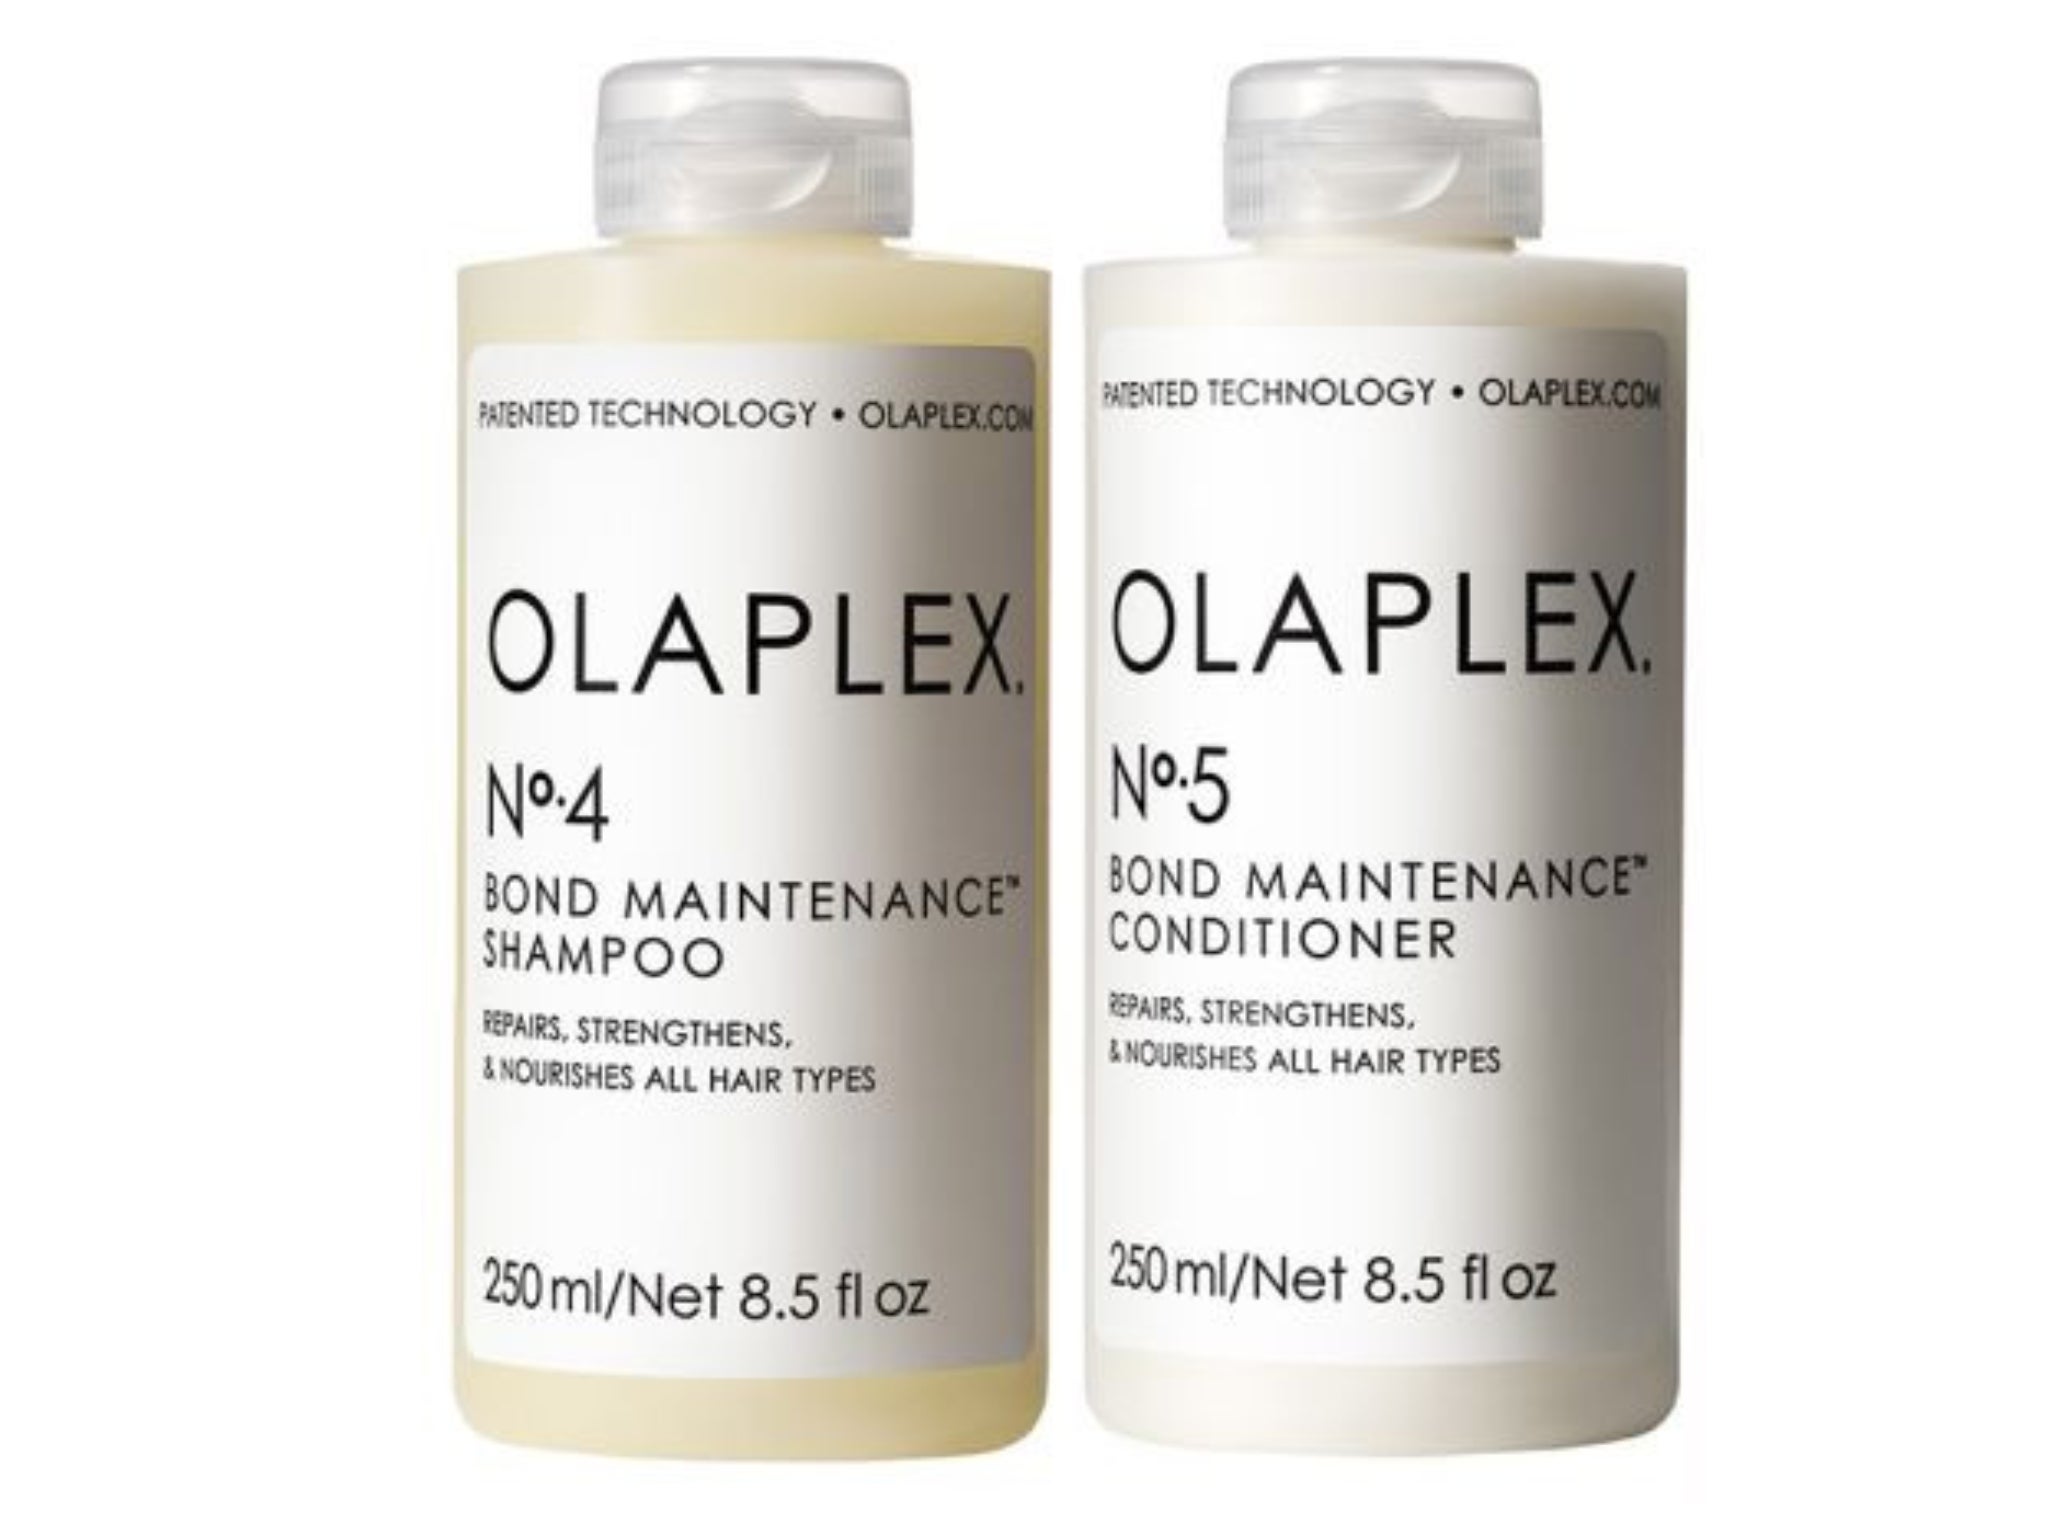 thg beauty, indybest, olaplex shampoo and conditioner are hair strengthening heroes – and there’s currently 20% off